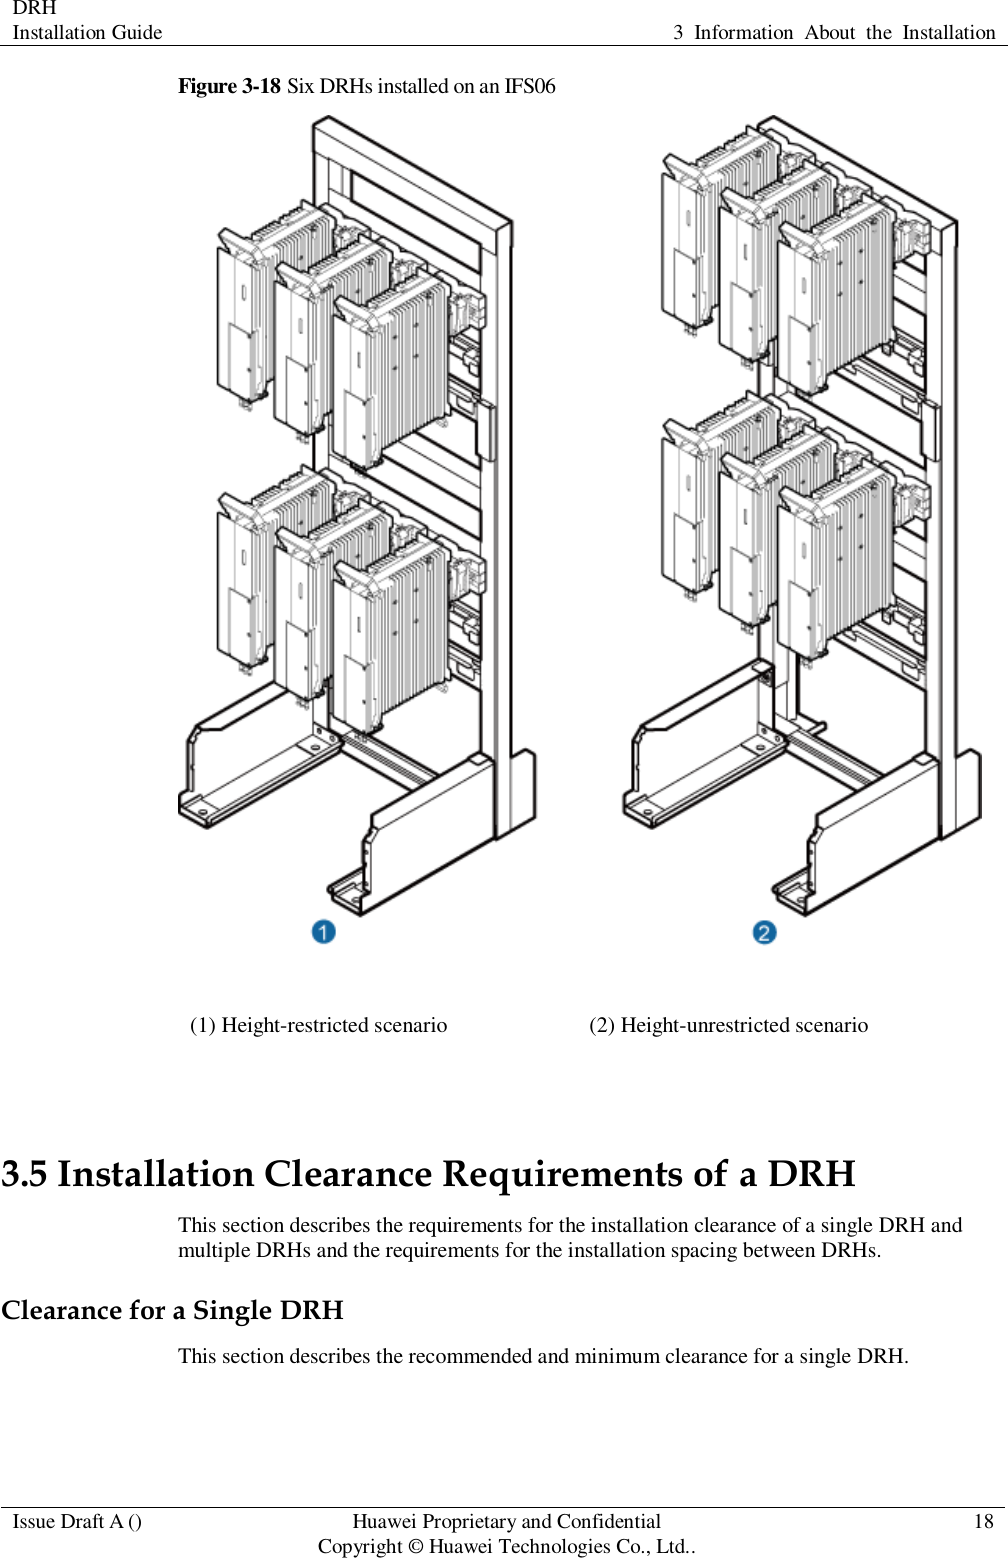 DRH   Installation Guide 3  Information  About  the  Installation  Issue Draft A () Huawei Proprietary and Confidential                                     Copyright © Huawei Technologies Co., Ltd.. 18  Figure 3-18 Six DRHs installed on an IFS06  (1) Height-restricted scenario (2) Height-unrestricted scenario  3.5 Installation Clearance Requirements of a DRH This section describes the requirements for the installation clearance of a single DRH and multiple DRHs and the requirements for the installation spacing between DRHs. Clearance for a Single DRH This section describes the recommended and minimum clearance for a single DRH. 